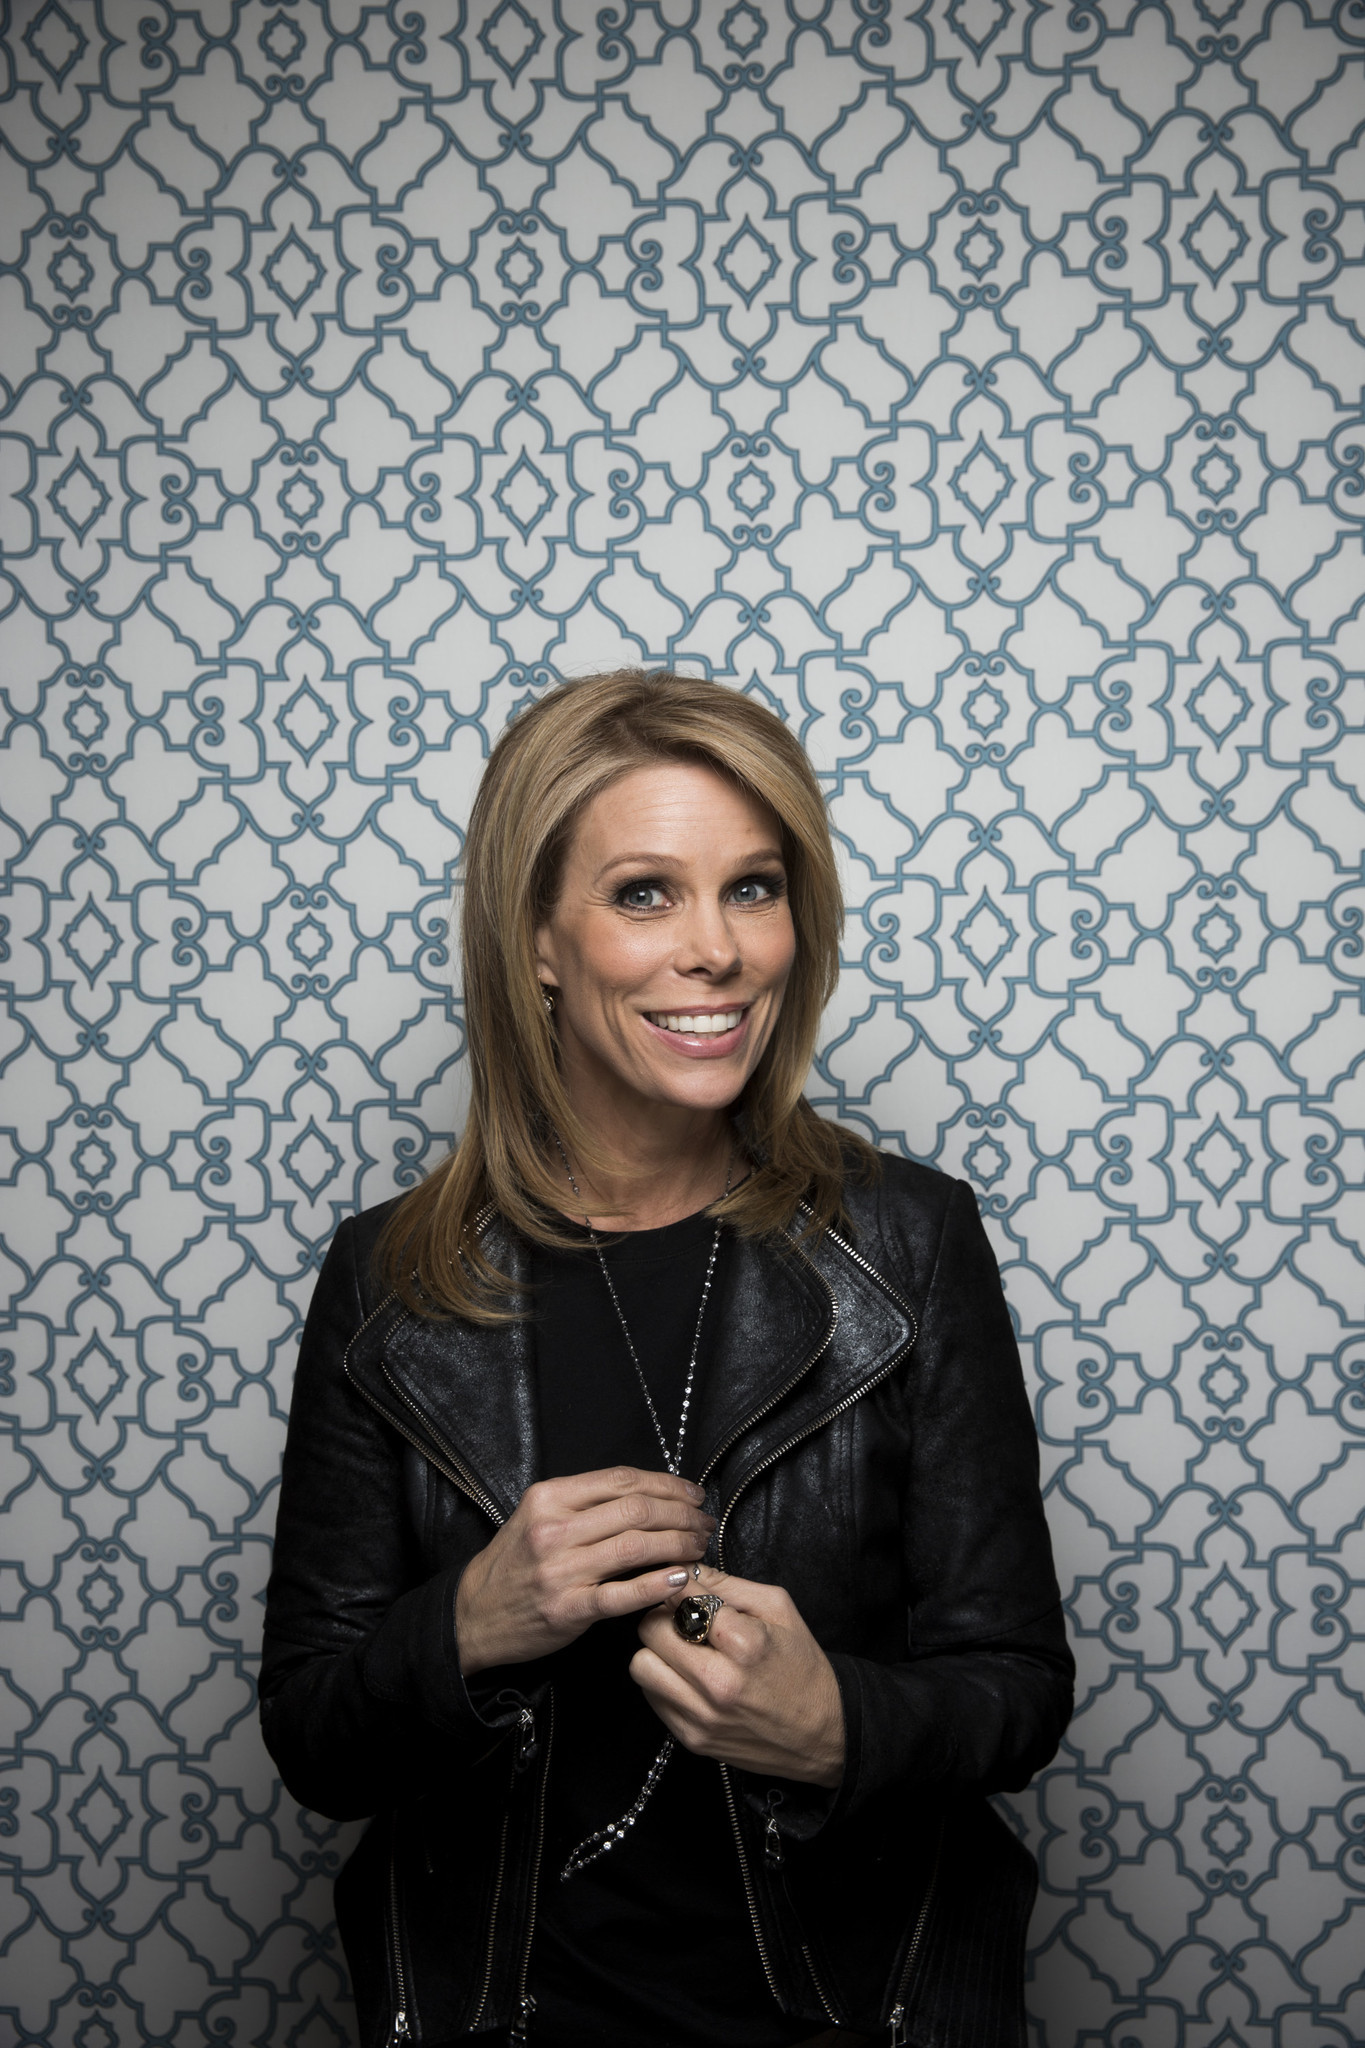 Cheryl Hines sells her home in Bel-Air - LA Times1365 x 2048